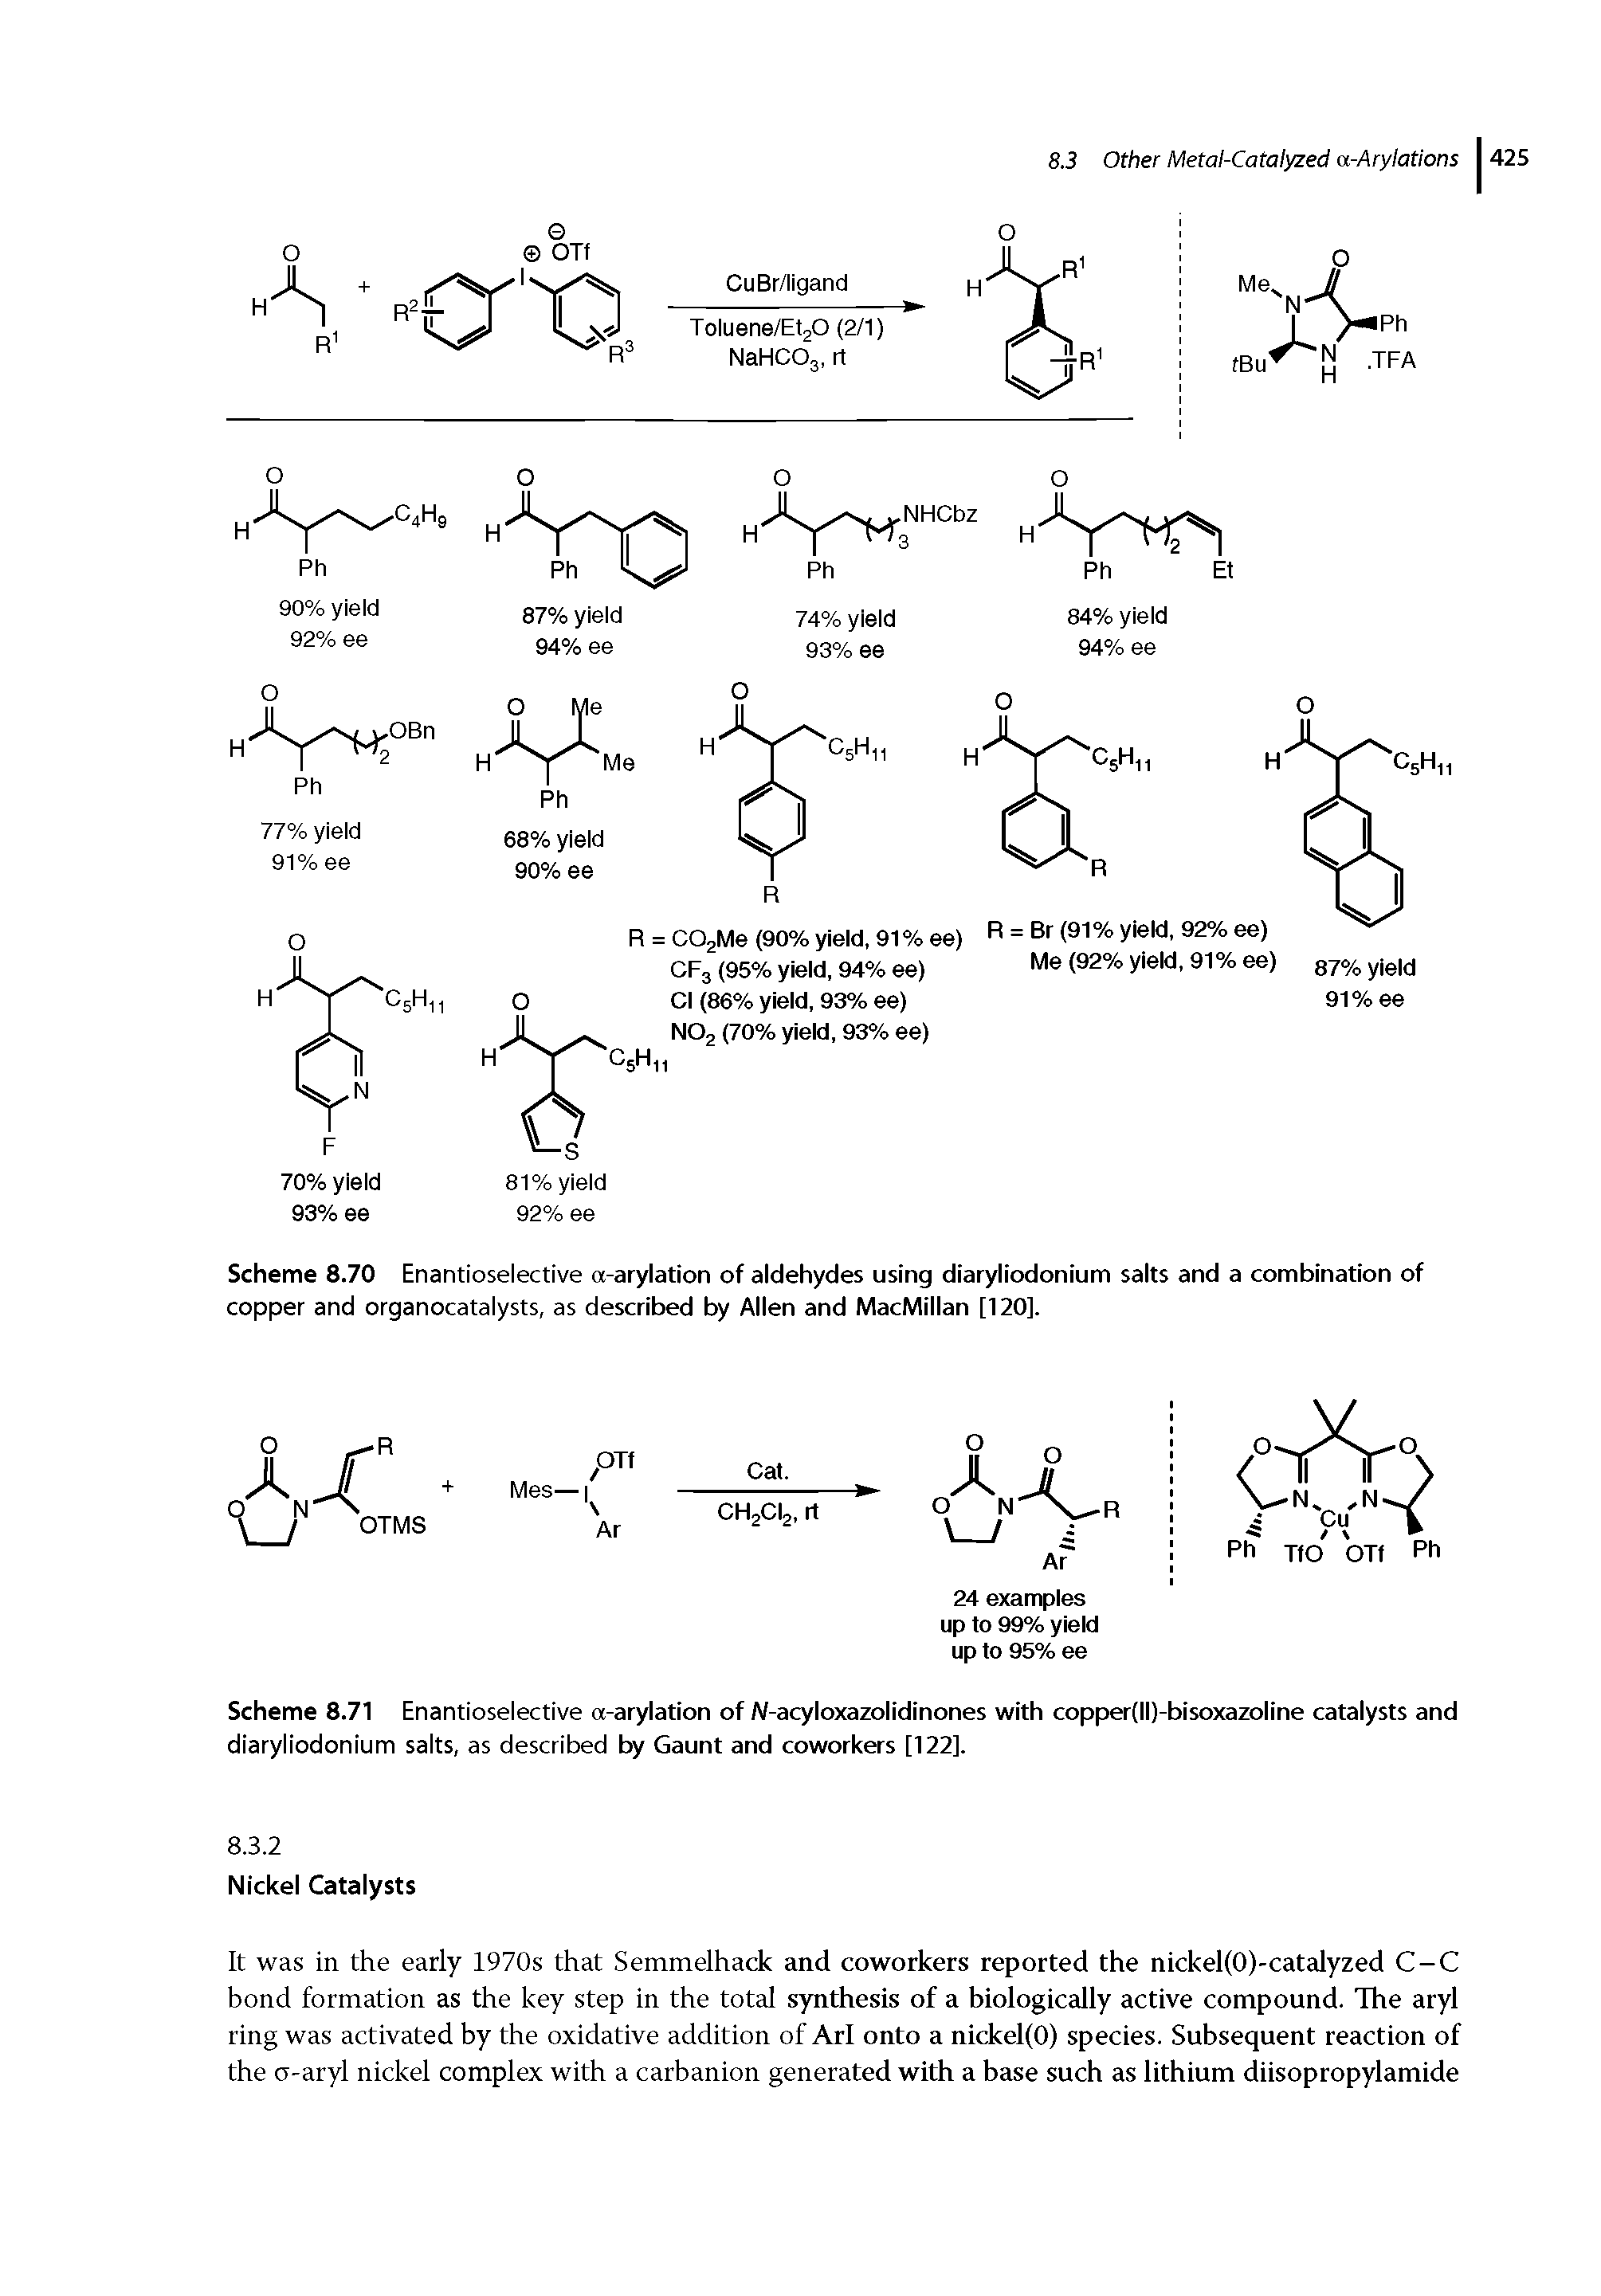 Scheme 8,71 Enantioselective a-arylation of W-acyloxazolidinones with copper(ll)-bisoxazoline catalysts and diaryliodonium salts, as described by Gaunt and coworkers [122].